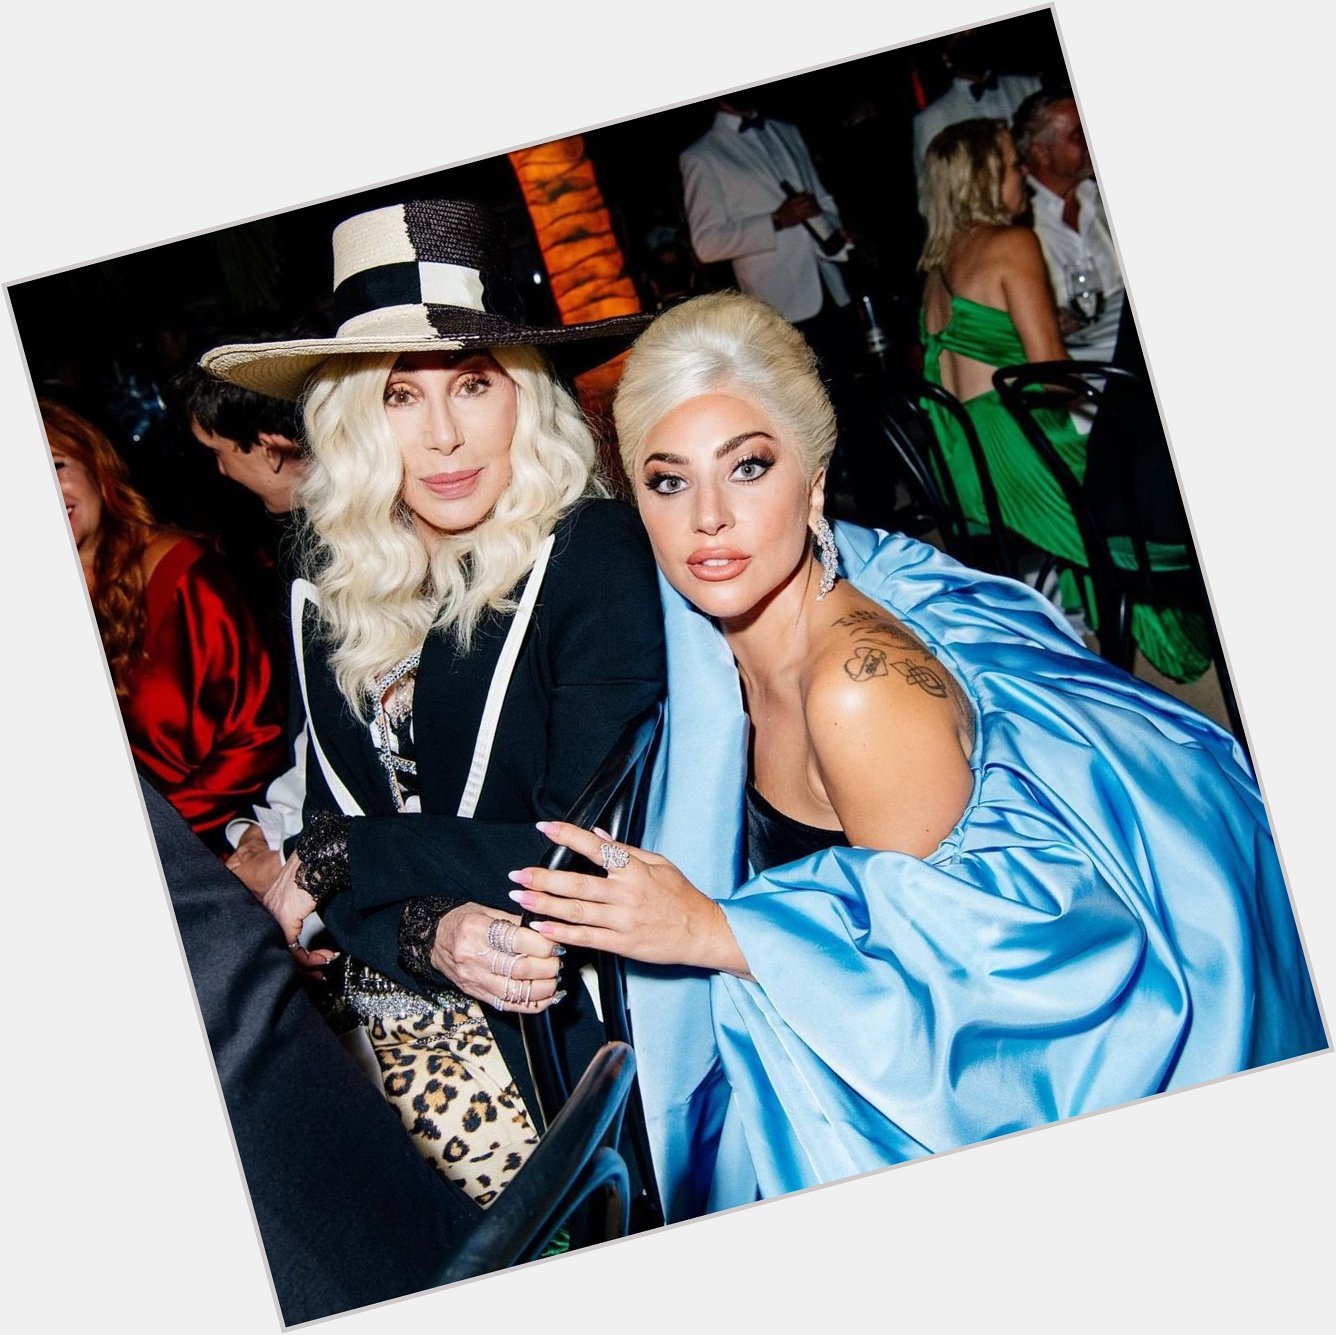 Happy Birthday, Thanks for sharing your talent (and helping Lady Gaga with her meat purse)! 